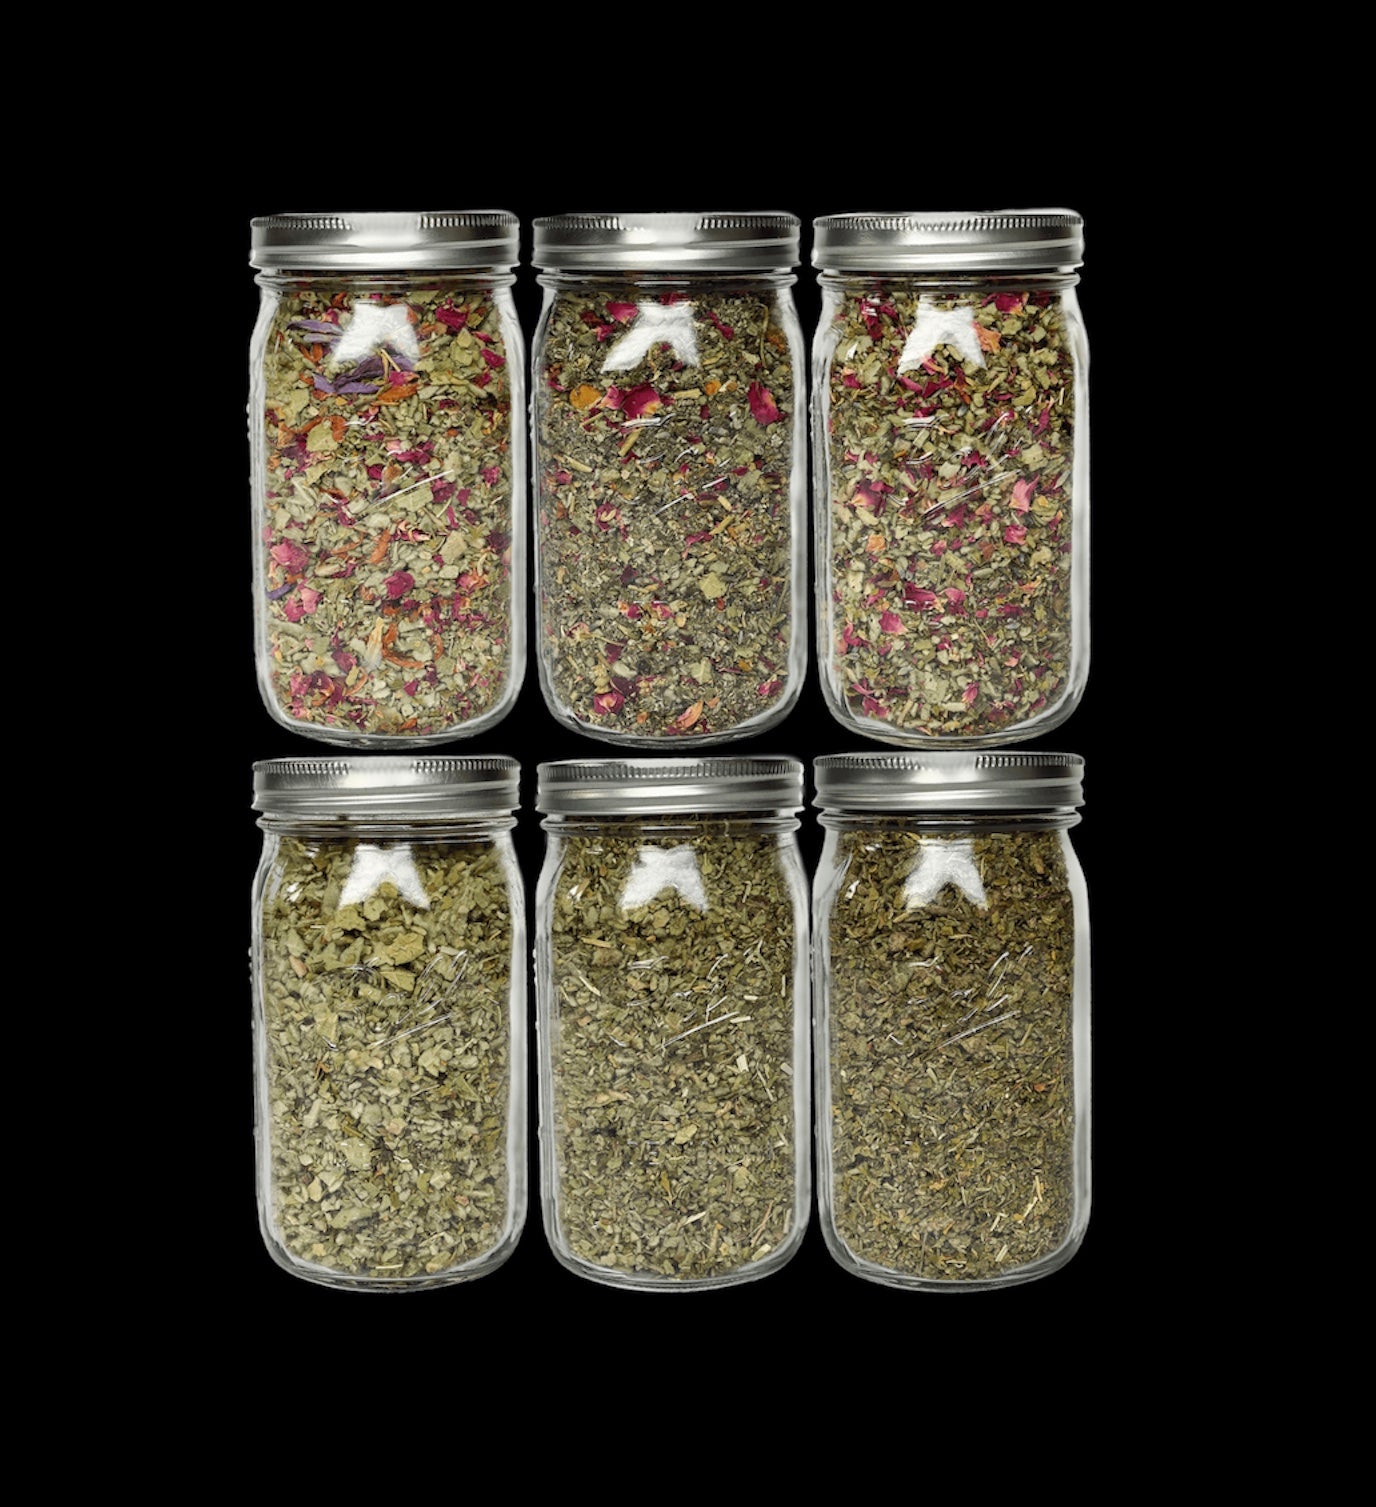 Smoking Herbs and Blends – Endlyss Indo